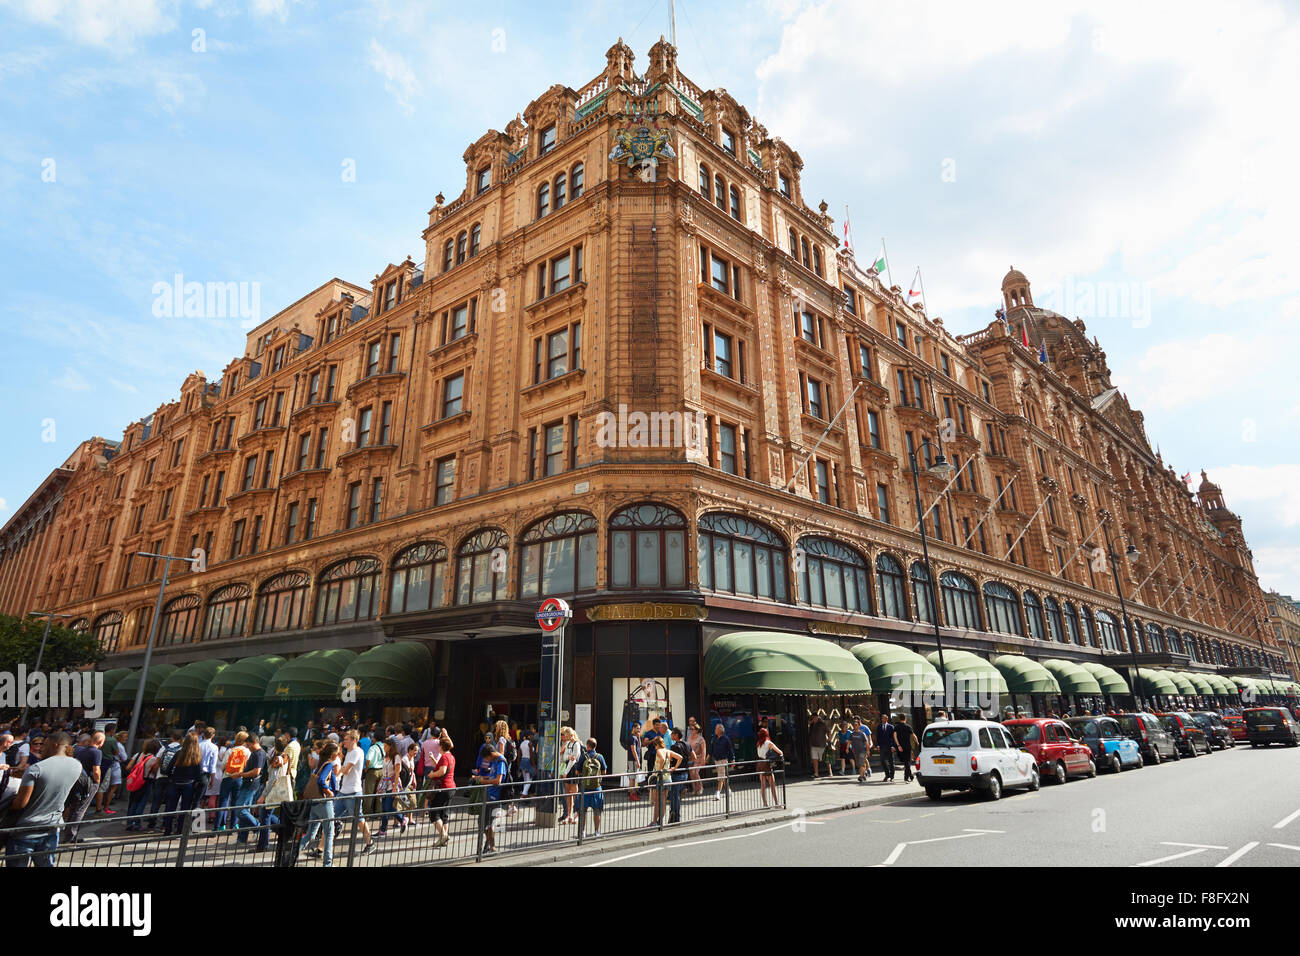 The famous Harrods department store building in a summer afternoon, people walking in London Stock Photo